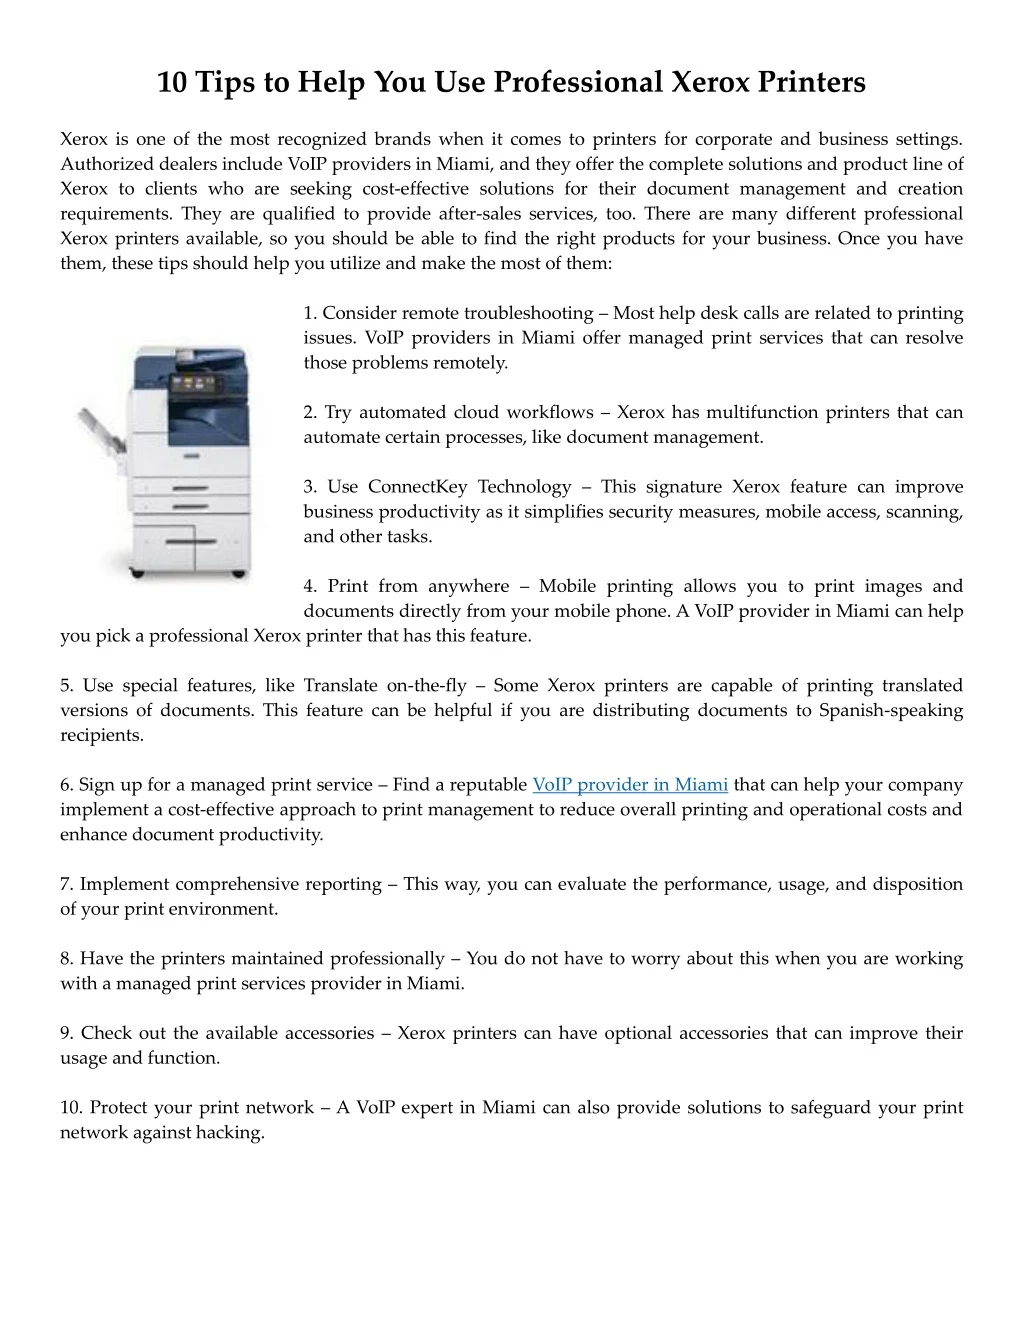 10 tips to help you use professional xerox